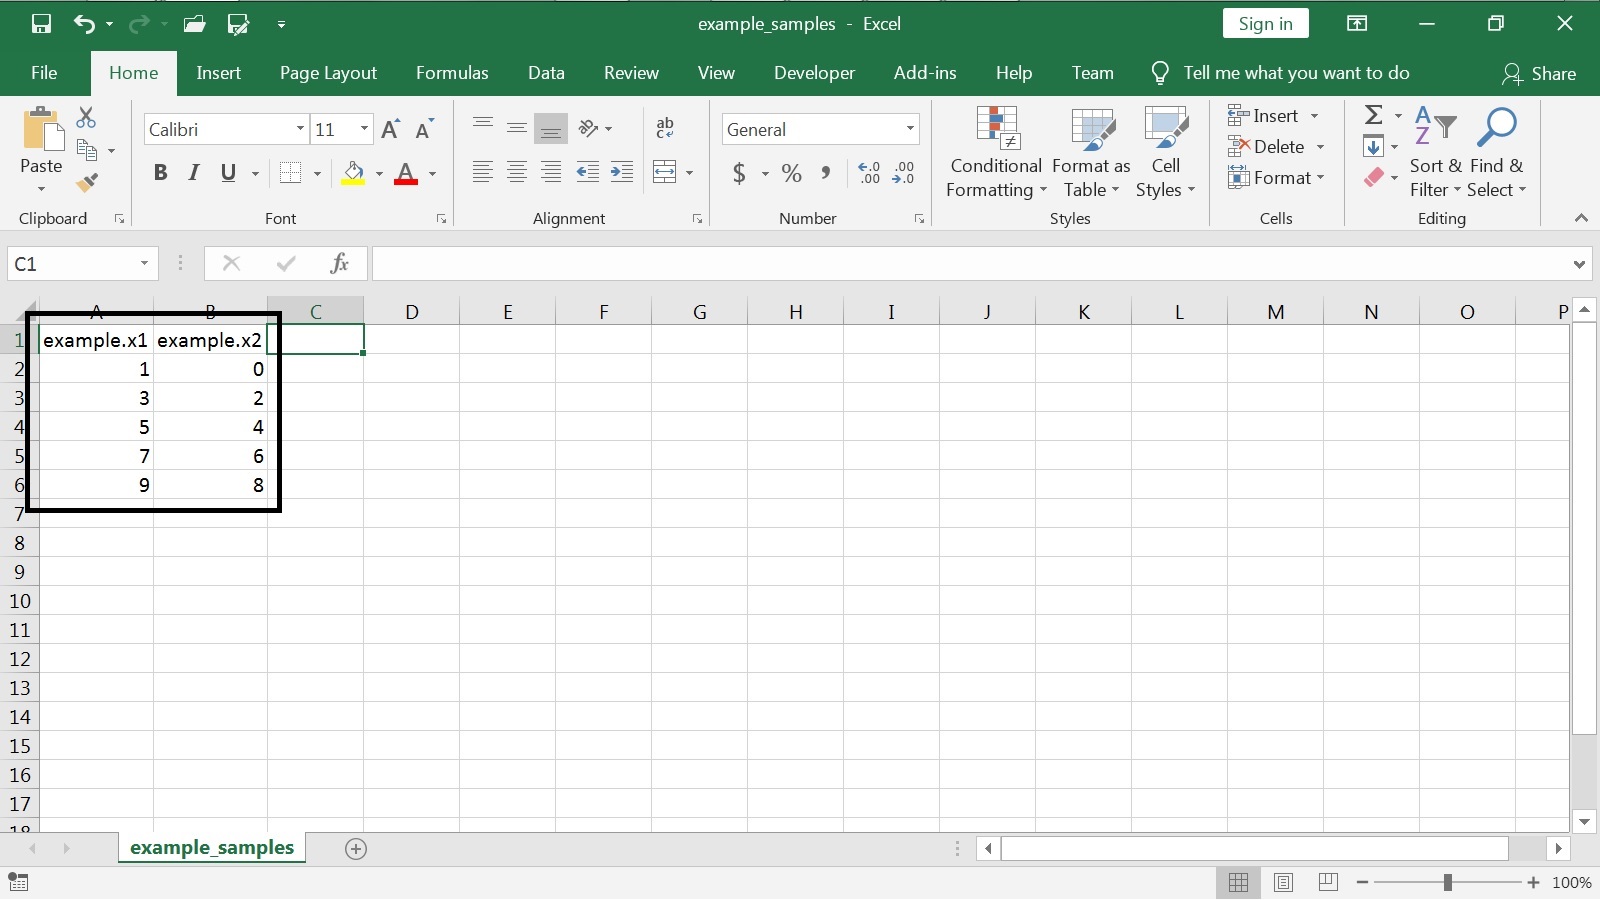 Specifying the Inputs in Excel